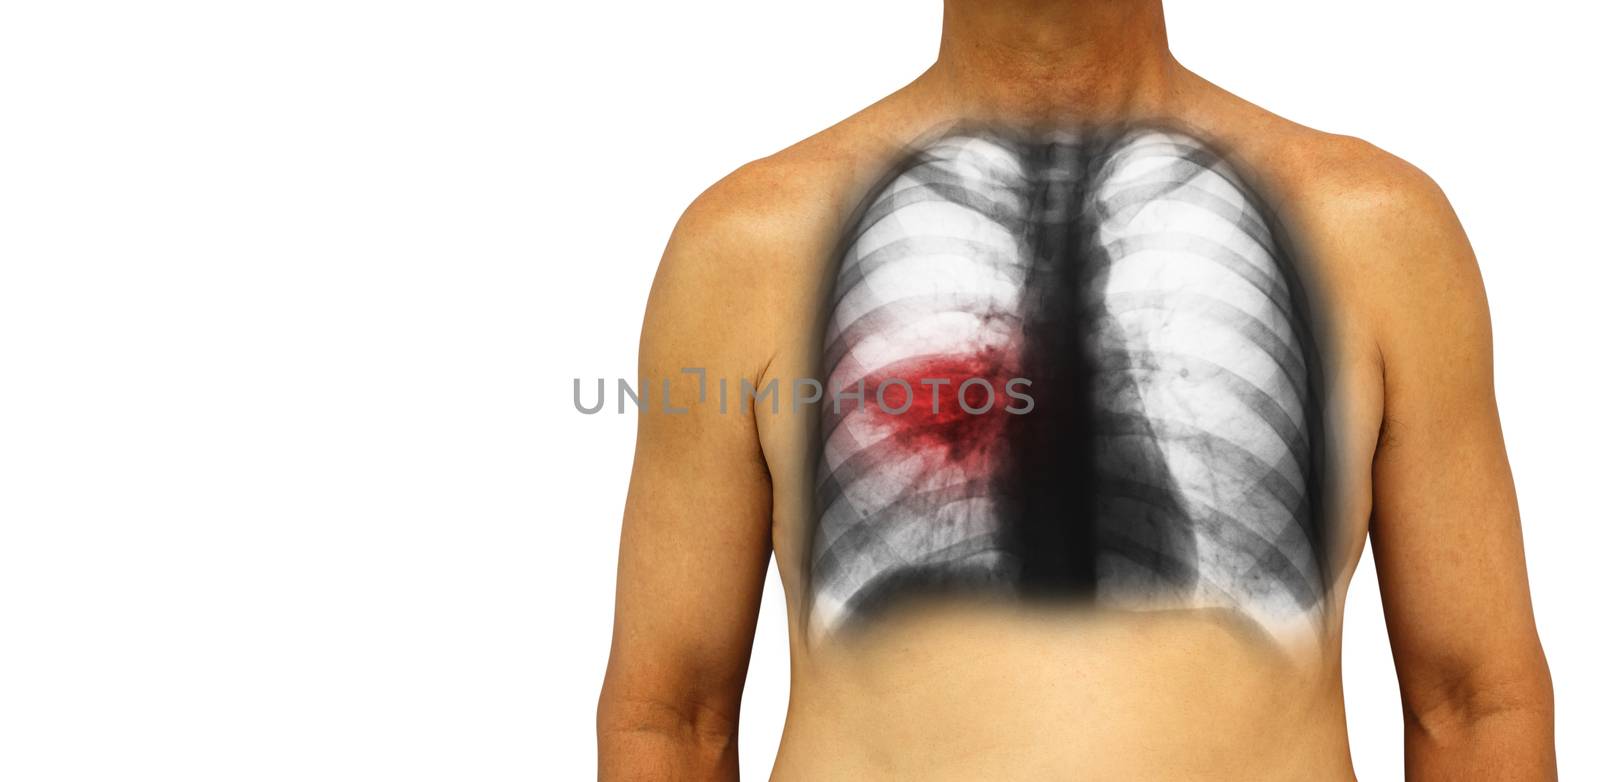 Pulmonary tuberculosis . Human chest with x-ray show patchy infiltrate at right lung due to infection . Isolated background . Blank area at Left side by stockdevil